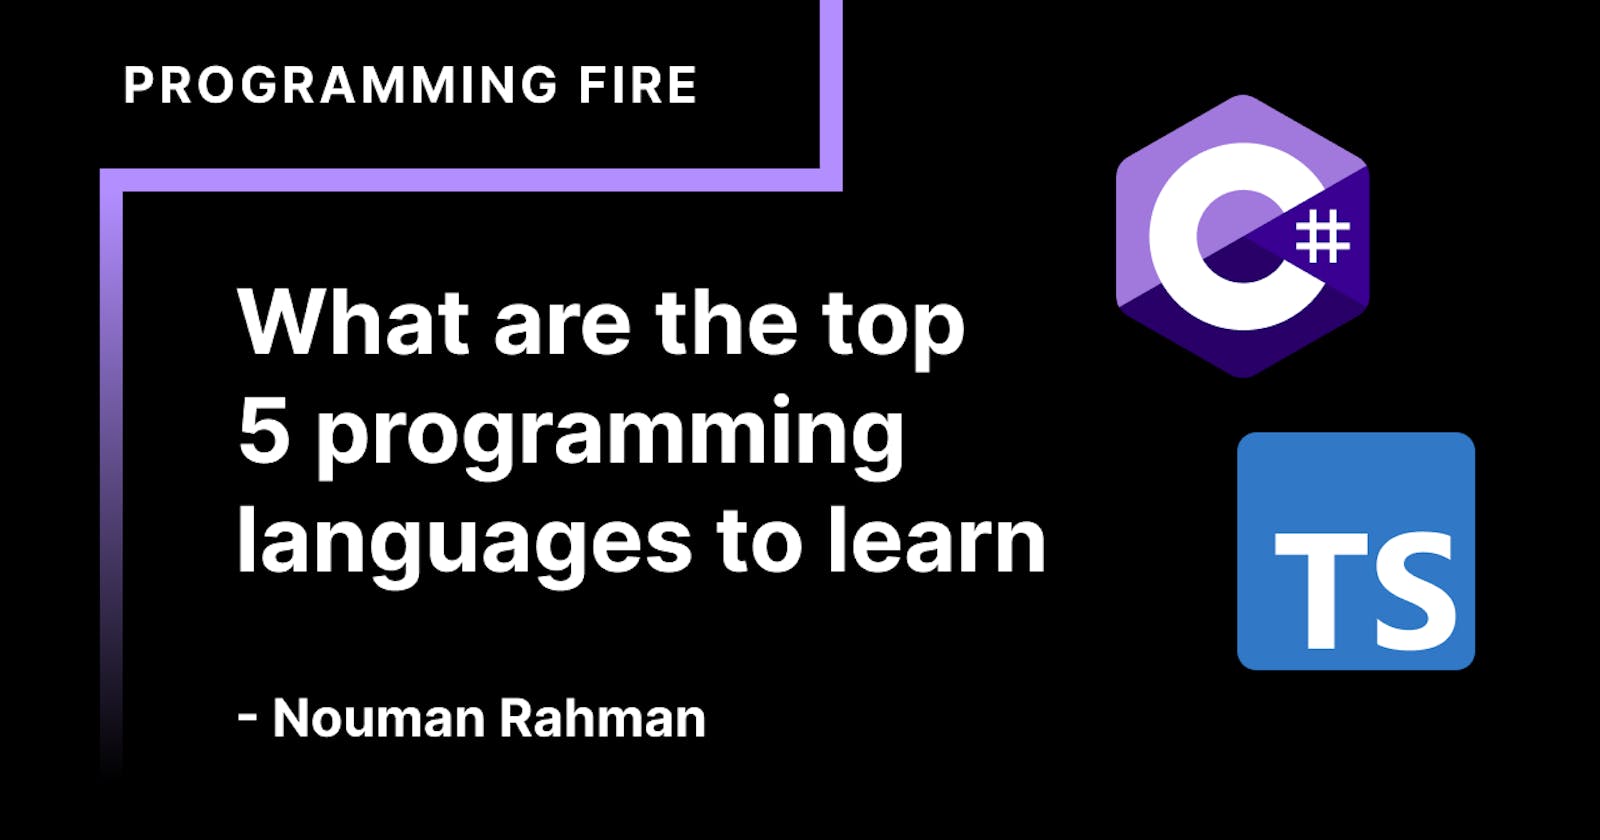 What are the top 5 programming language to learn